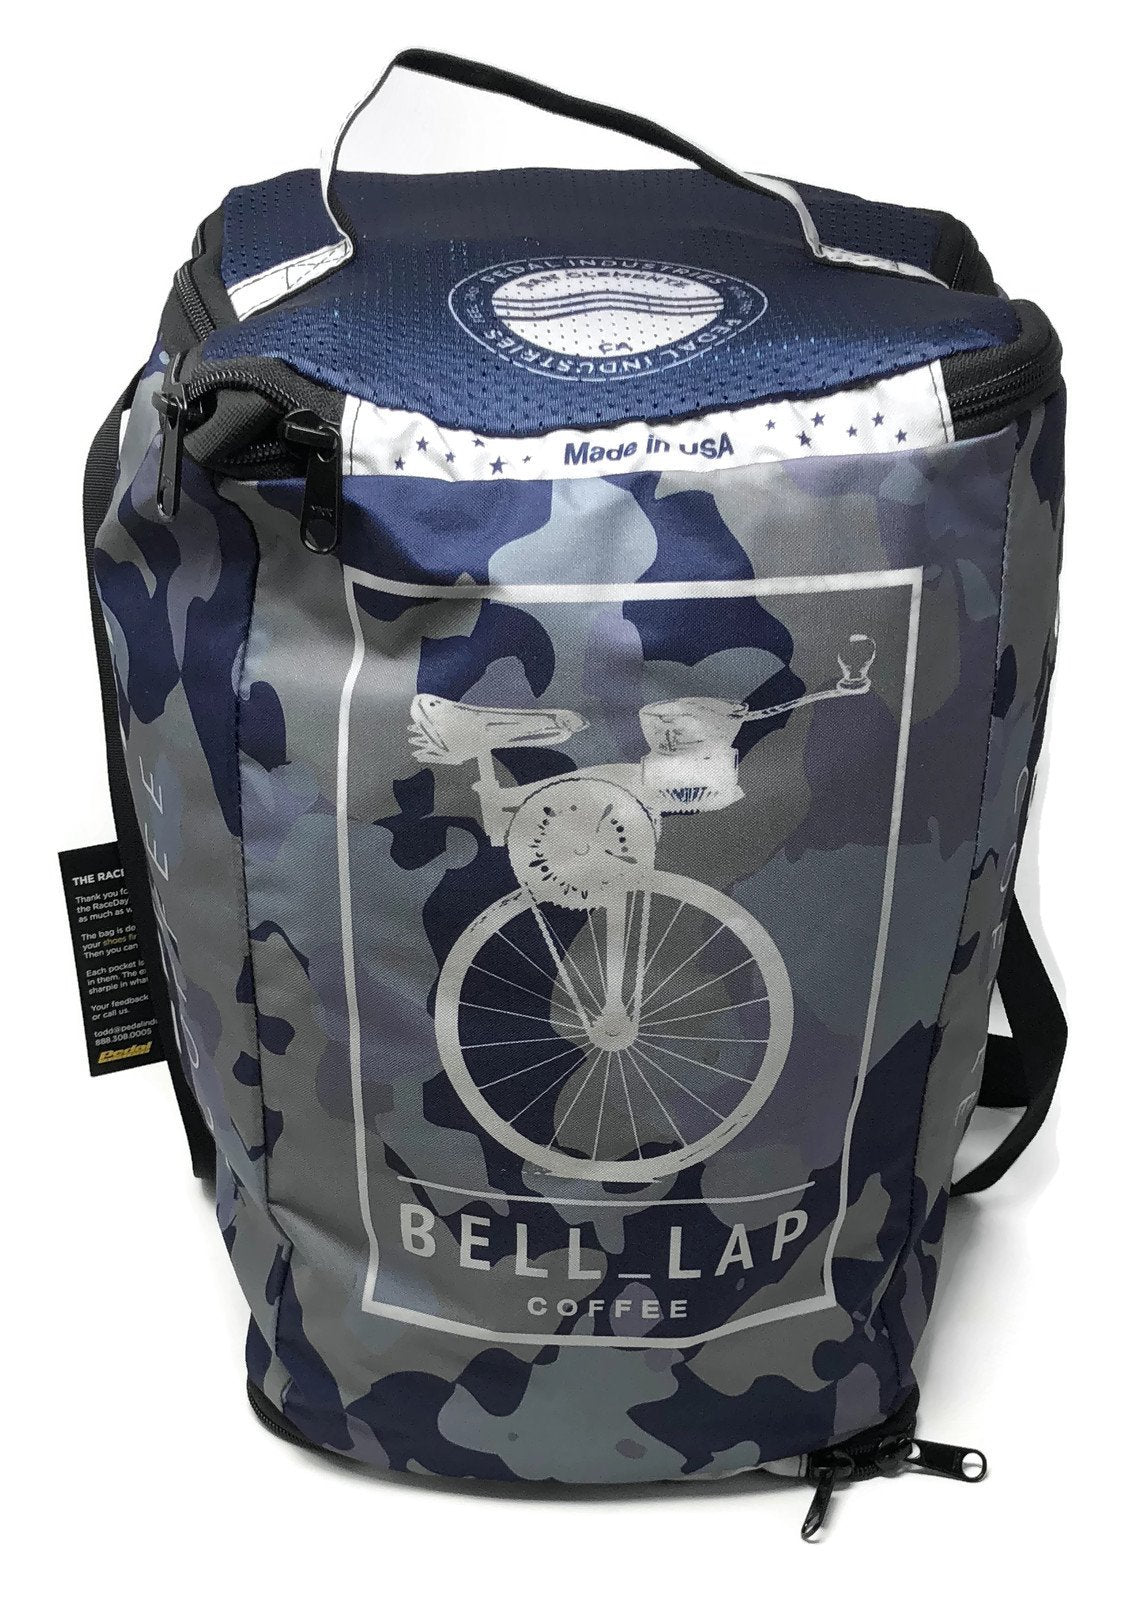 Bell Lap Coffee - new colors - RACEDAY BAG - ships in about 3 weeks